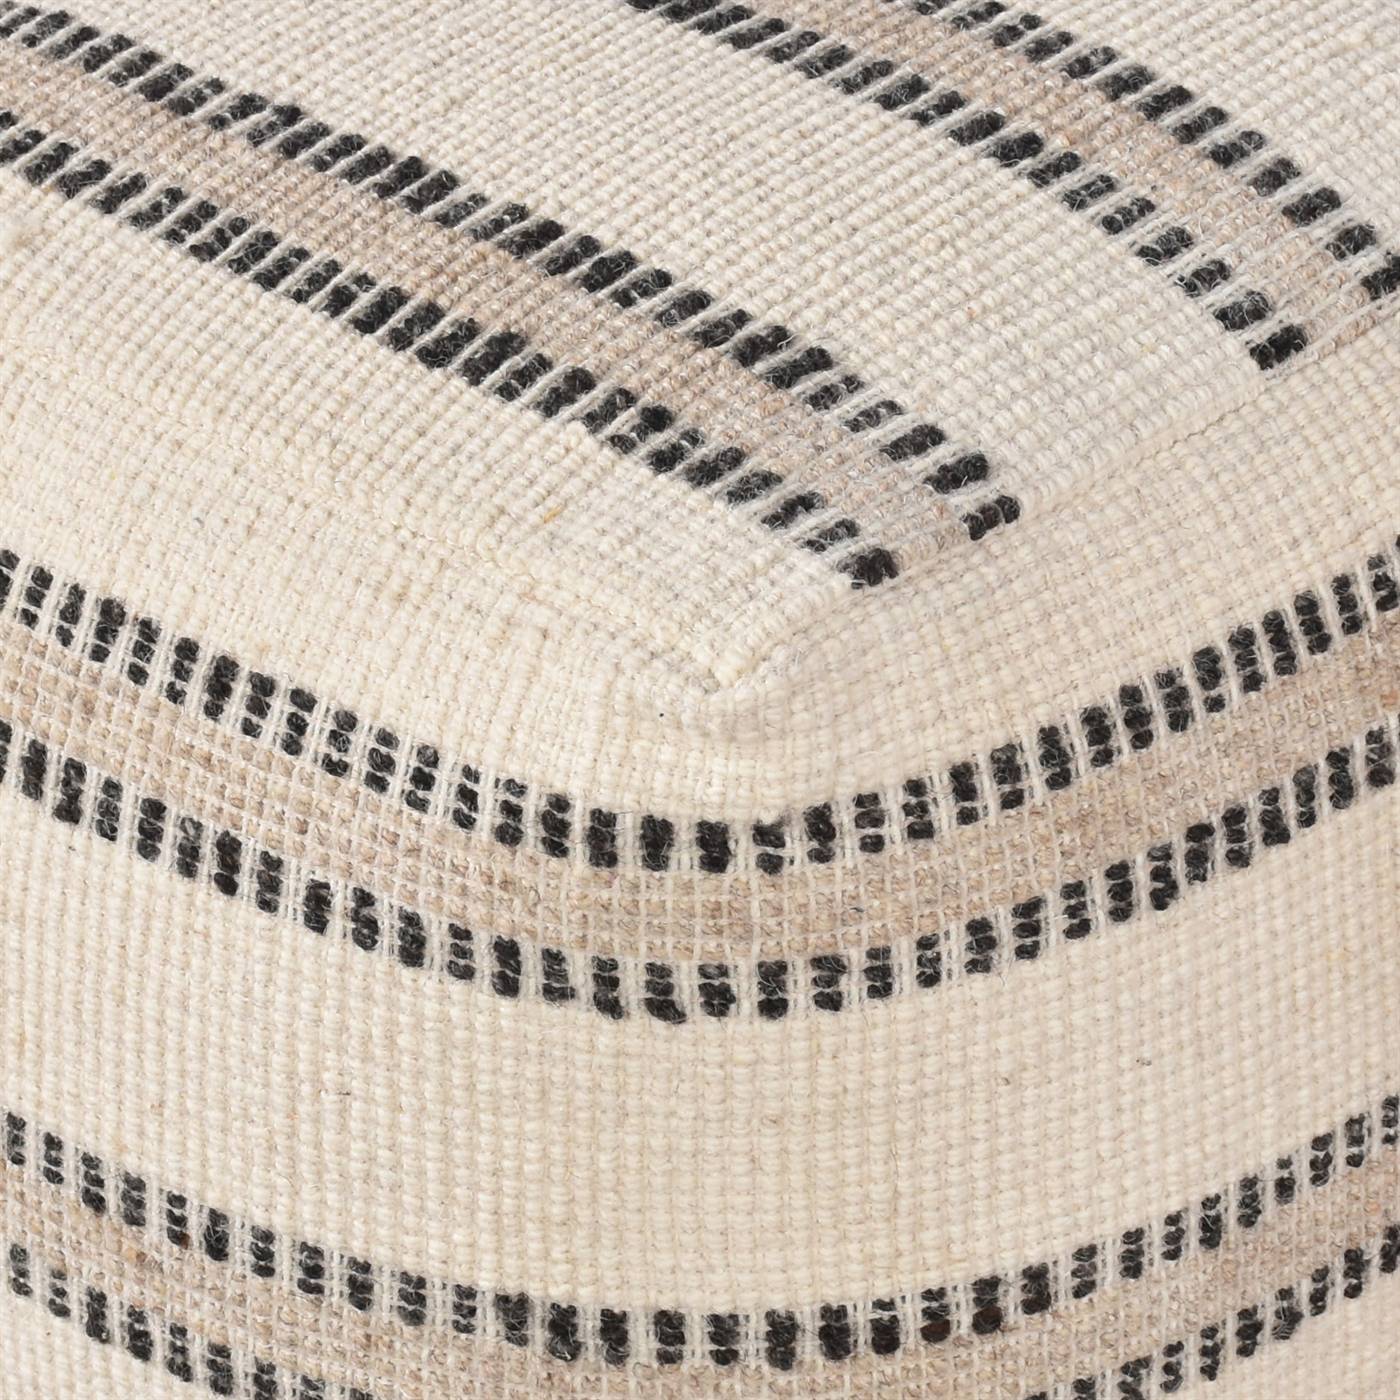 Blavet Pouf, 40x40x40 cm, Natural White, Charcoal, Wool, Hand Woven, Handwoven, All Loop